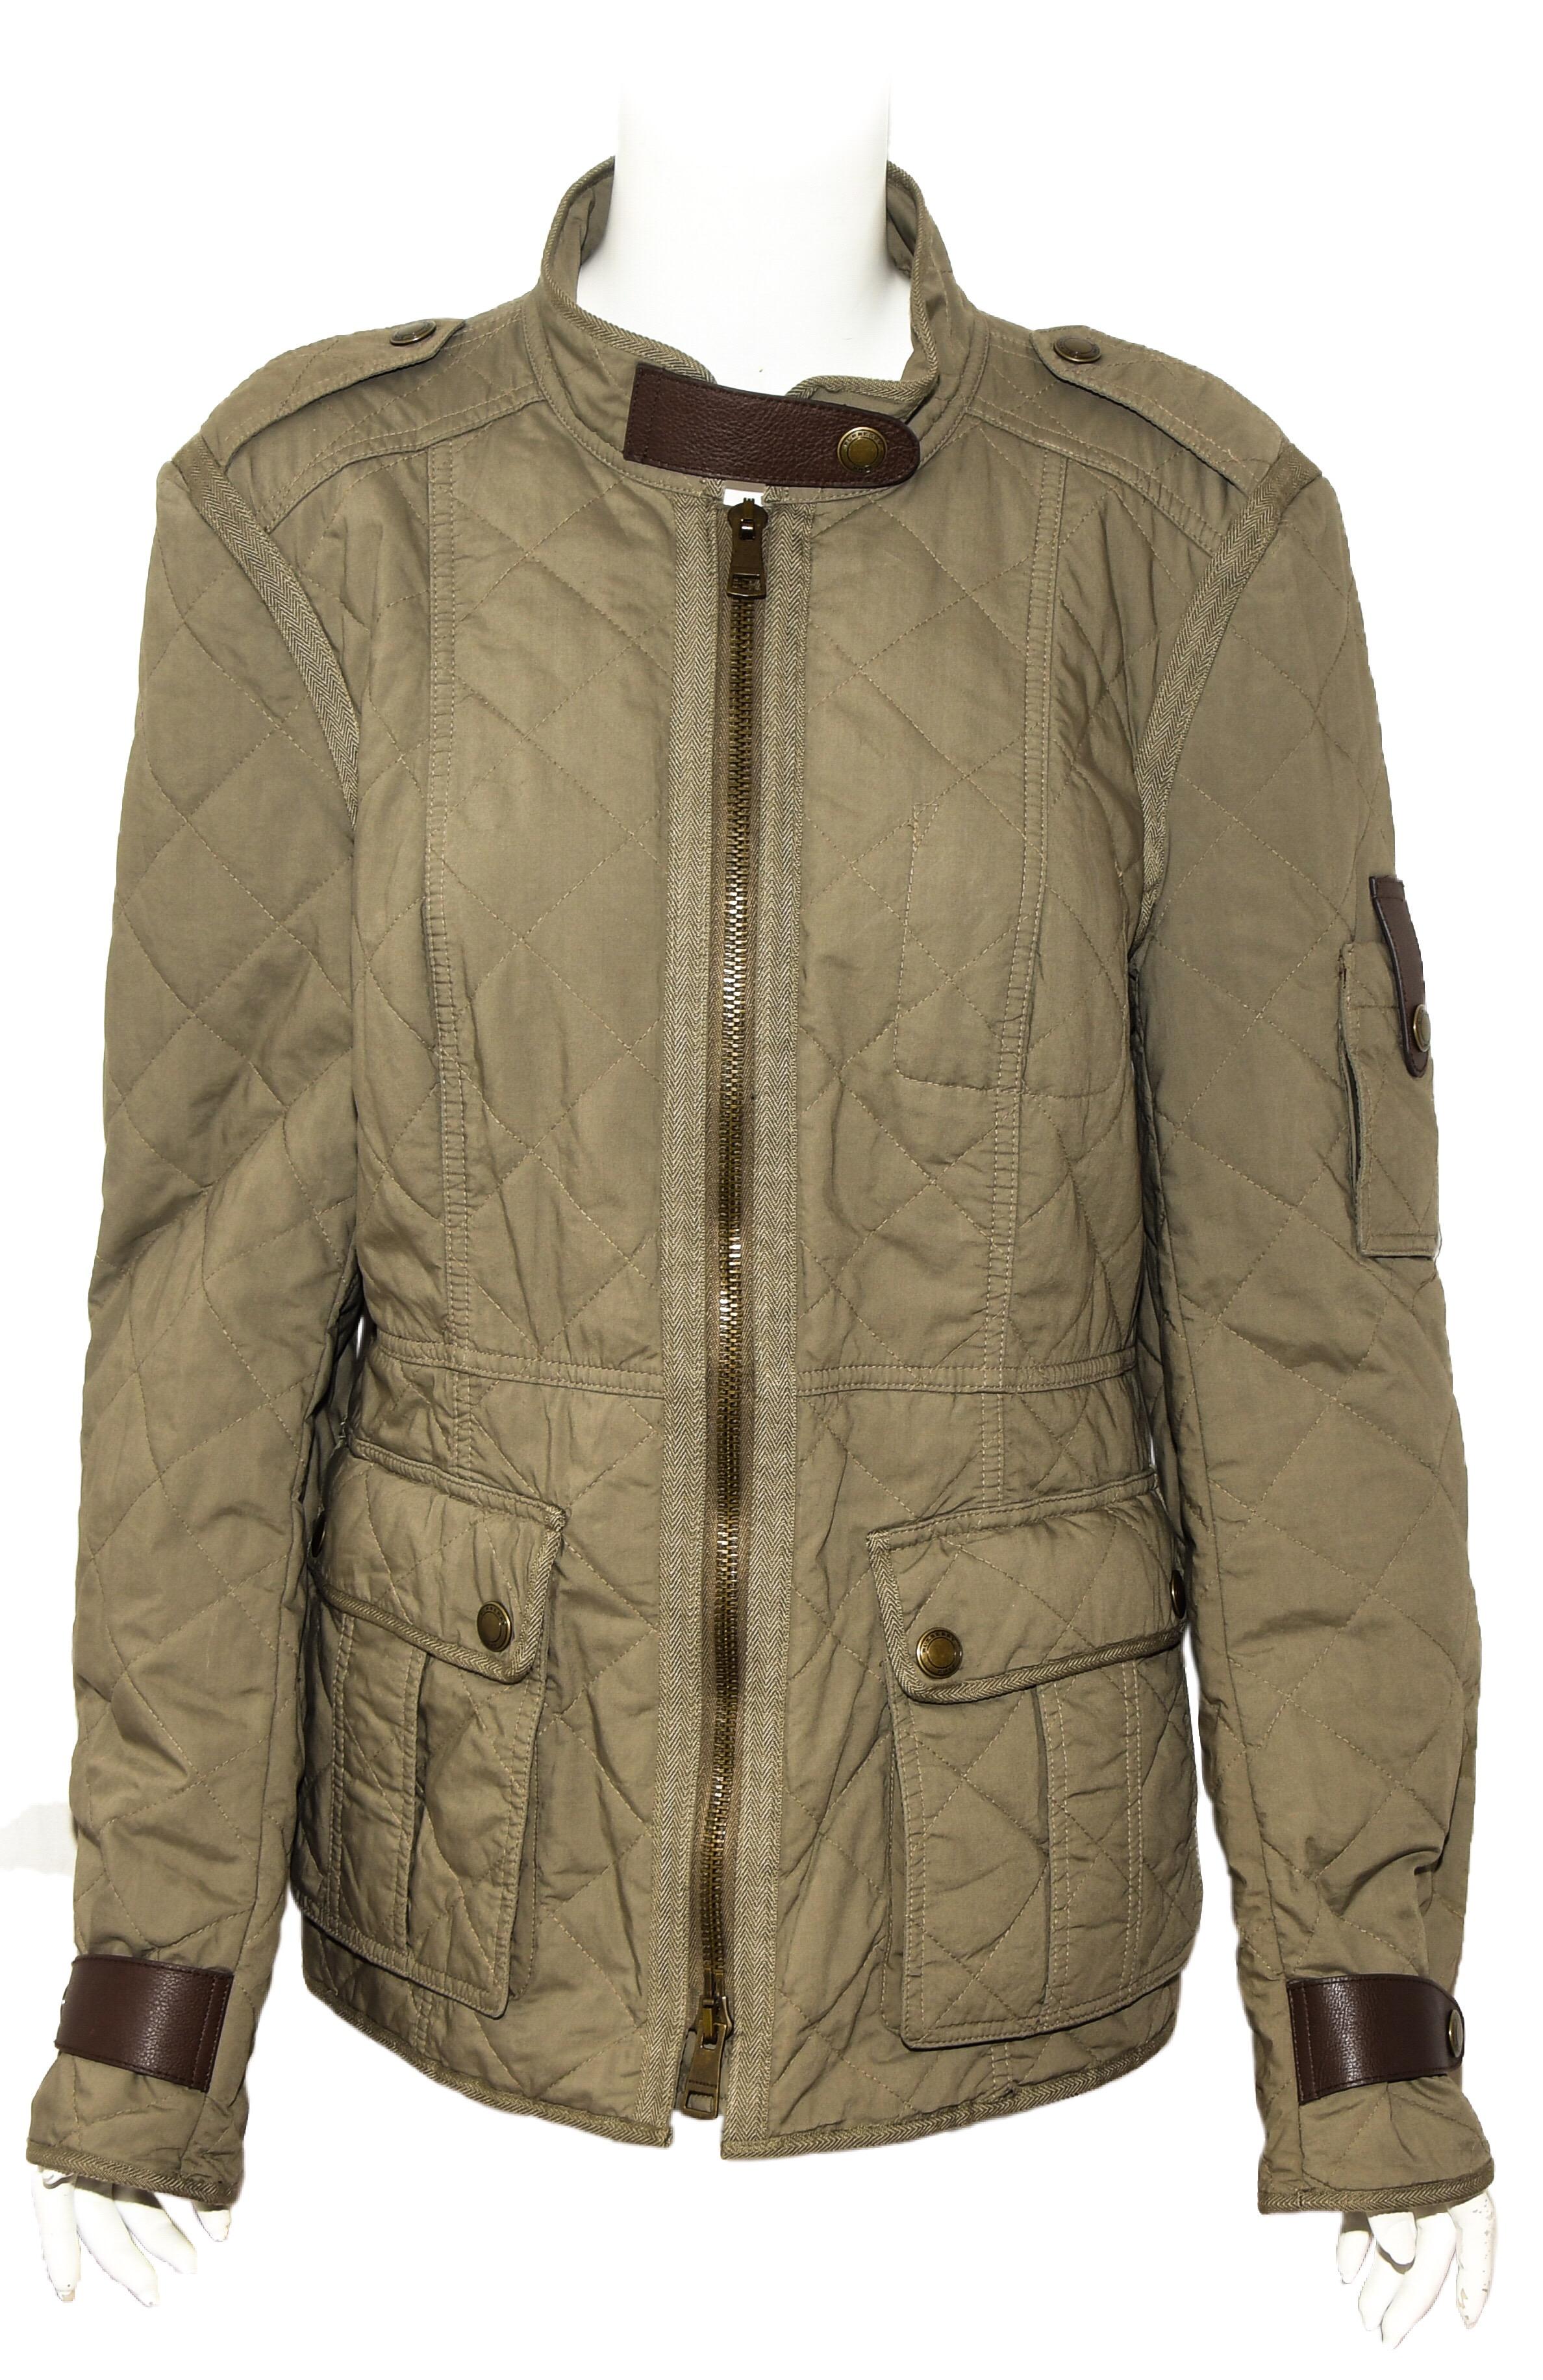 Burberry Brit bayleaf green cotton leather trimmed belted safari trench field jacketi is a classic piece!  With stand up collar and brown leather strap detail at collar, this jacket has the qualifications of a true safari field jacket.  Gold tone